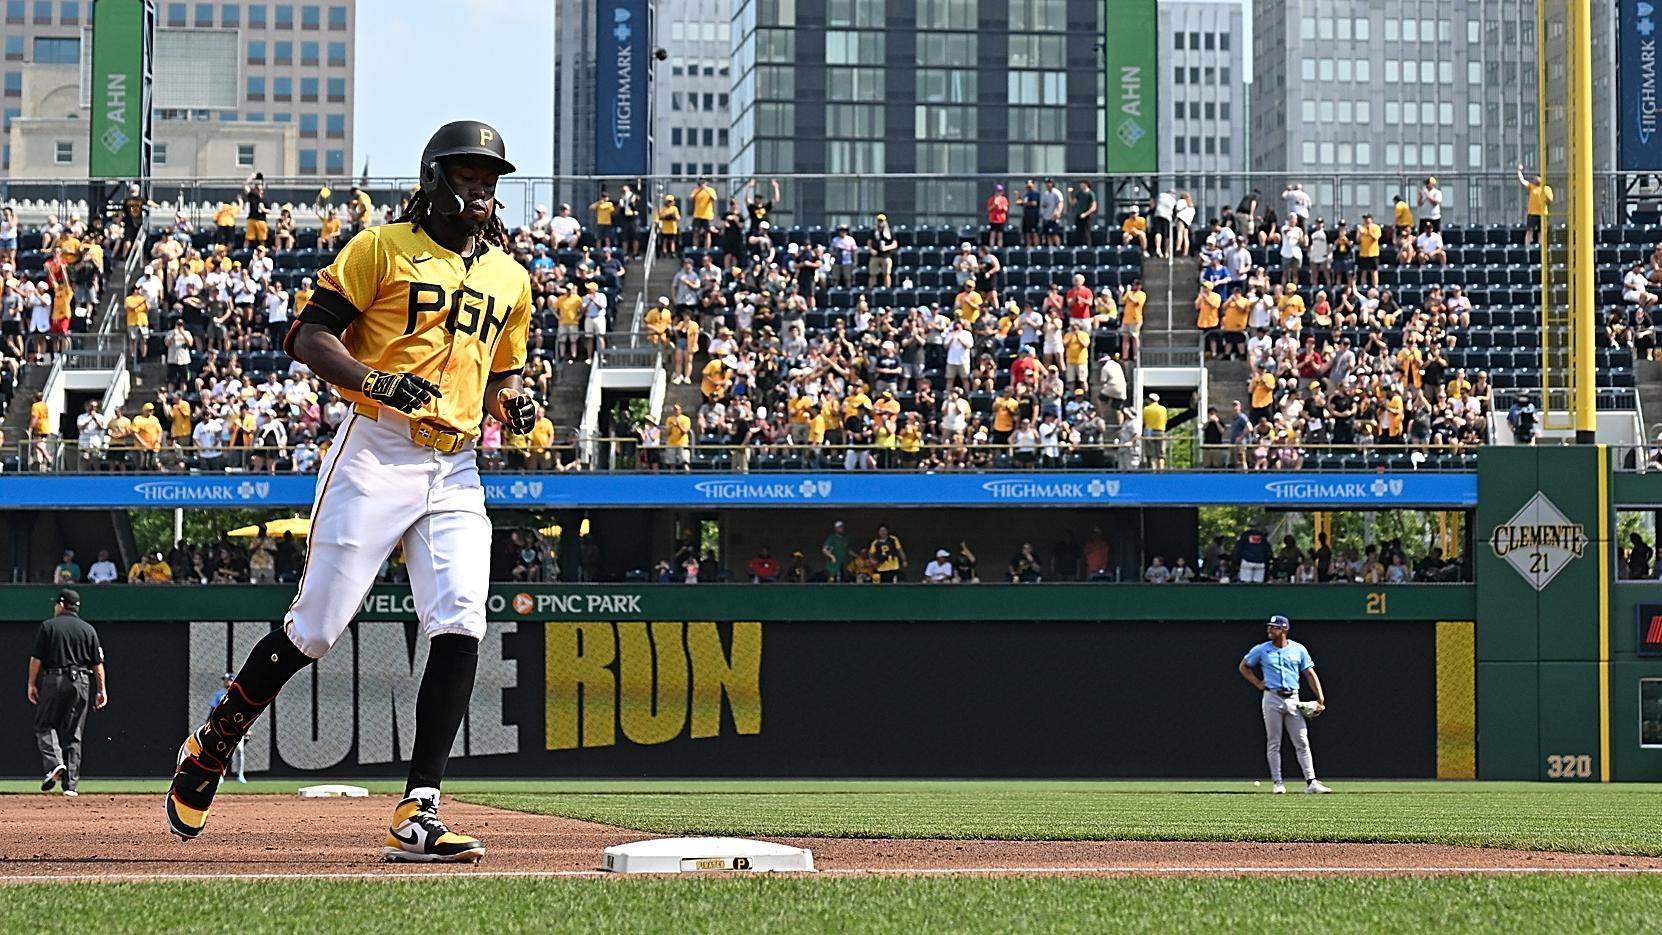 Jared Jones strikes out 8  Oneil Cruz hits the ball into the Allegheny as Pirates edge Rays 4-3